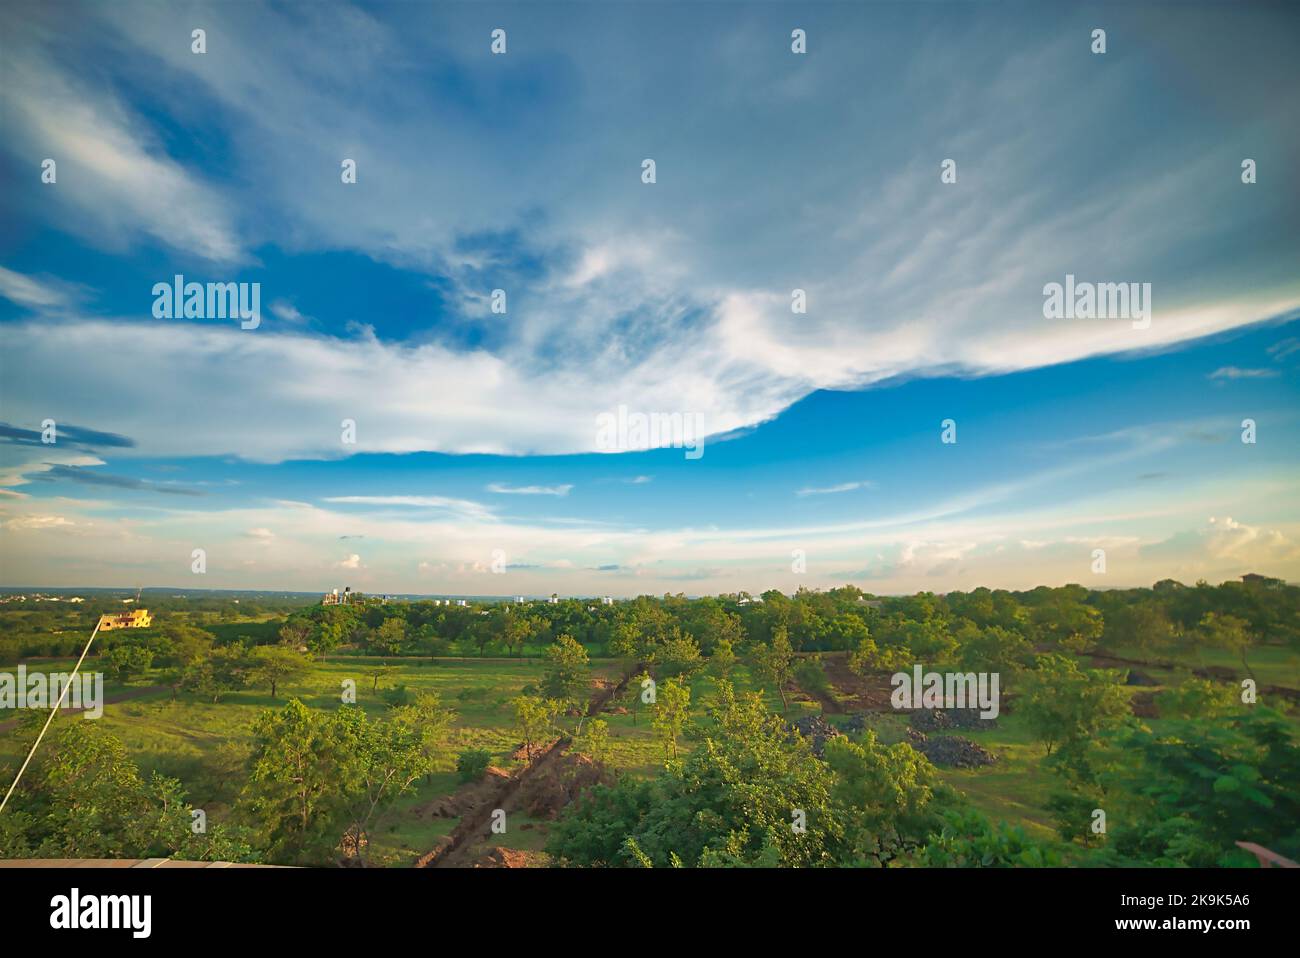 Dramatic scenic landscape background screen saver clouds green fields wide open spaces forest plantations outdoors rural  India Stock Photo